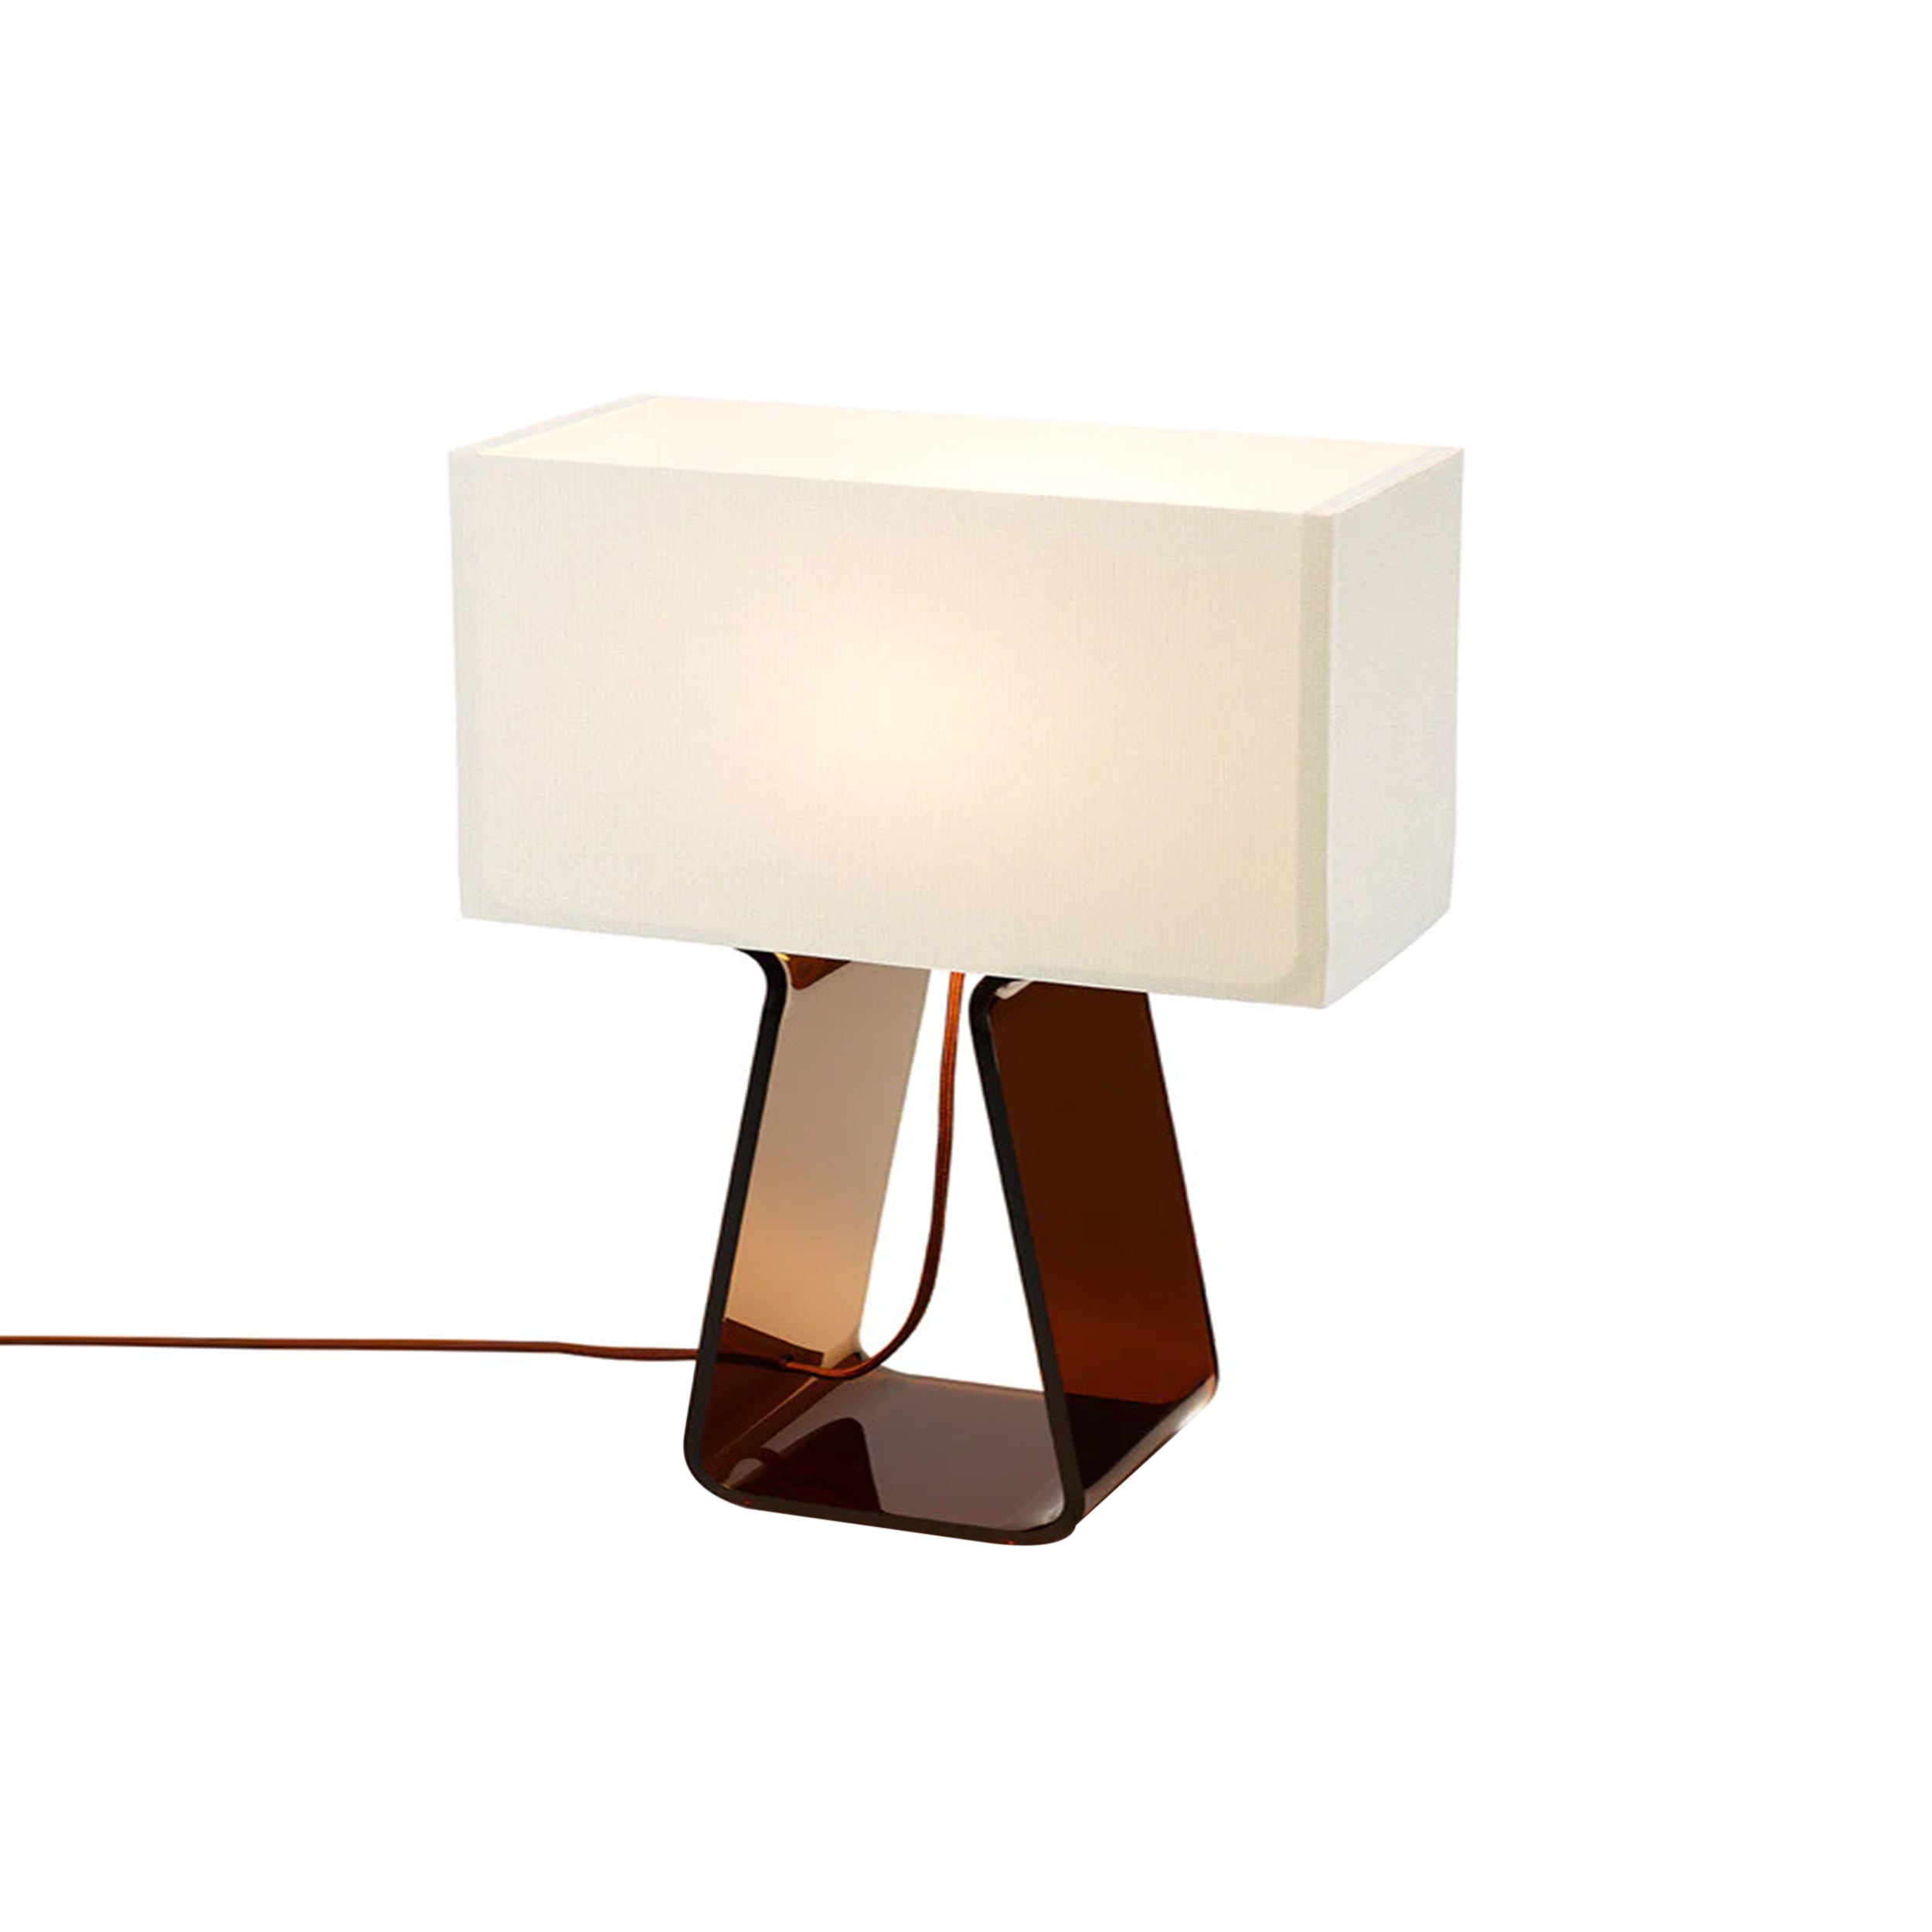 Tube Top Table Lamp: Array of Colors + Small - 14.2